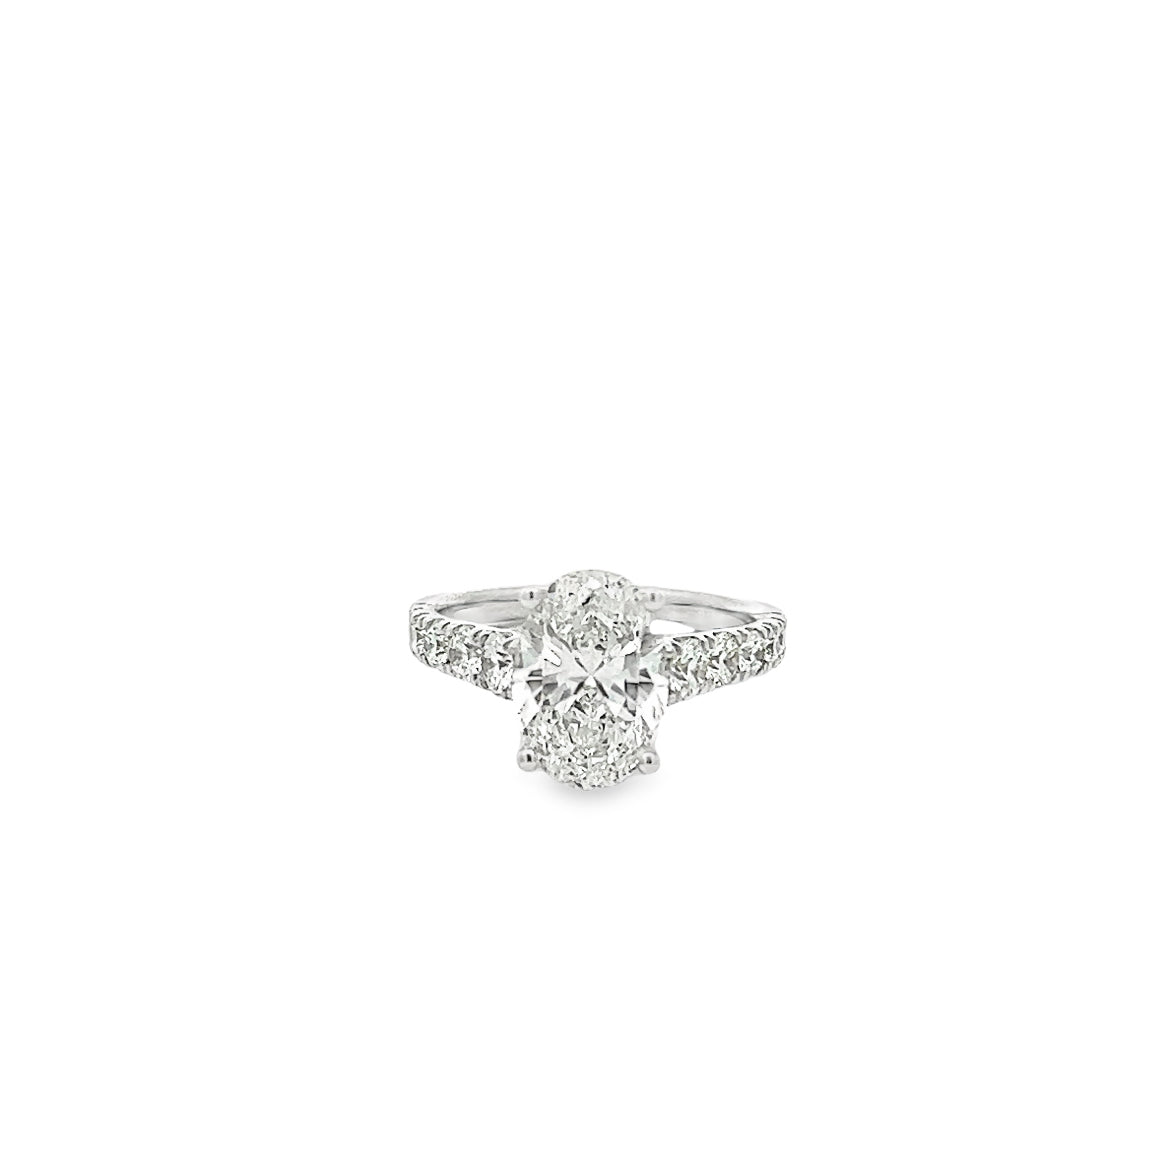 The Grand 18k White Gold Round Engagement Ring